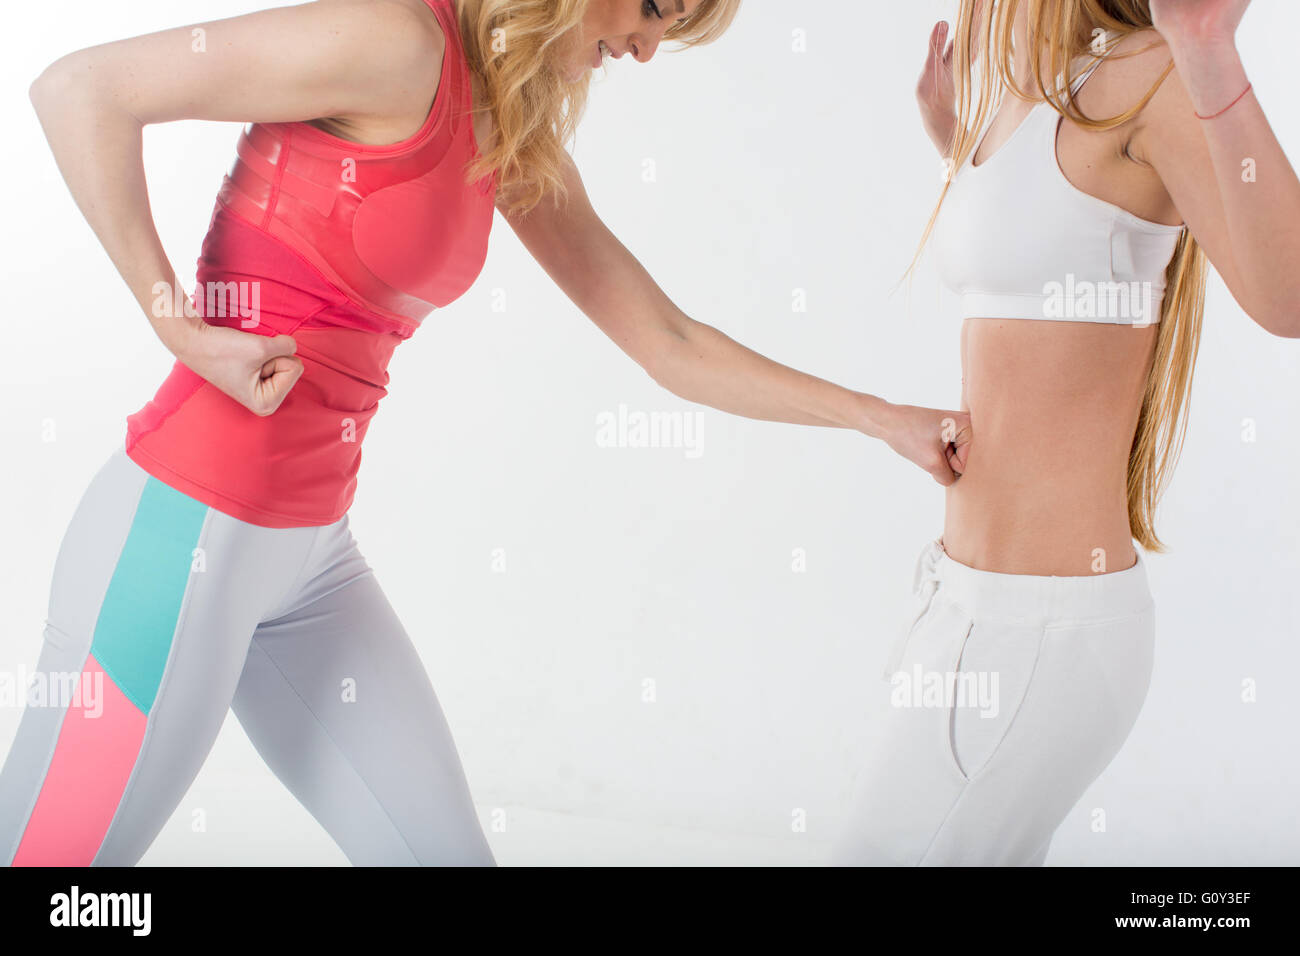 Two women athletes fighting in gym Stock Photo